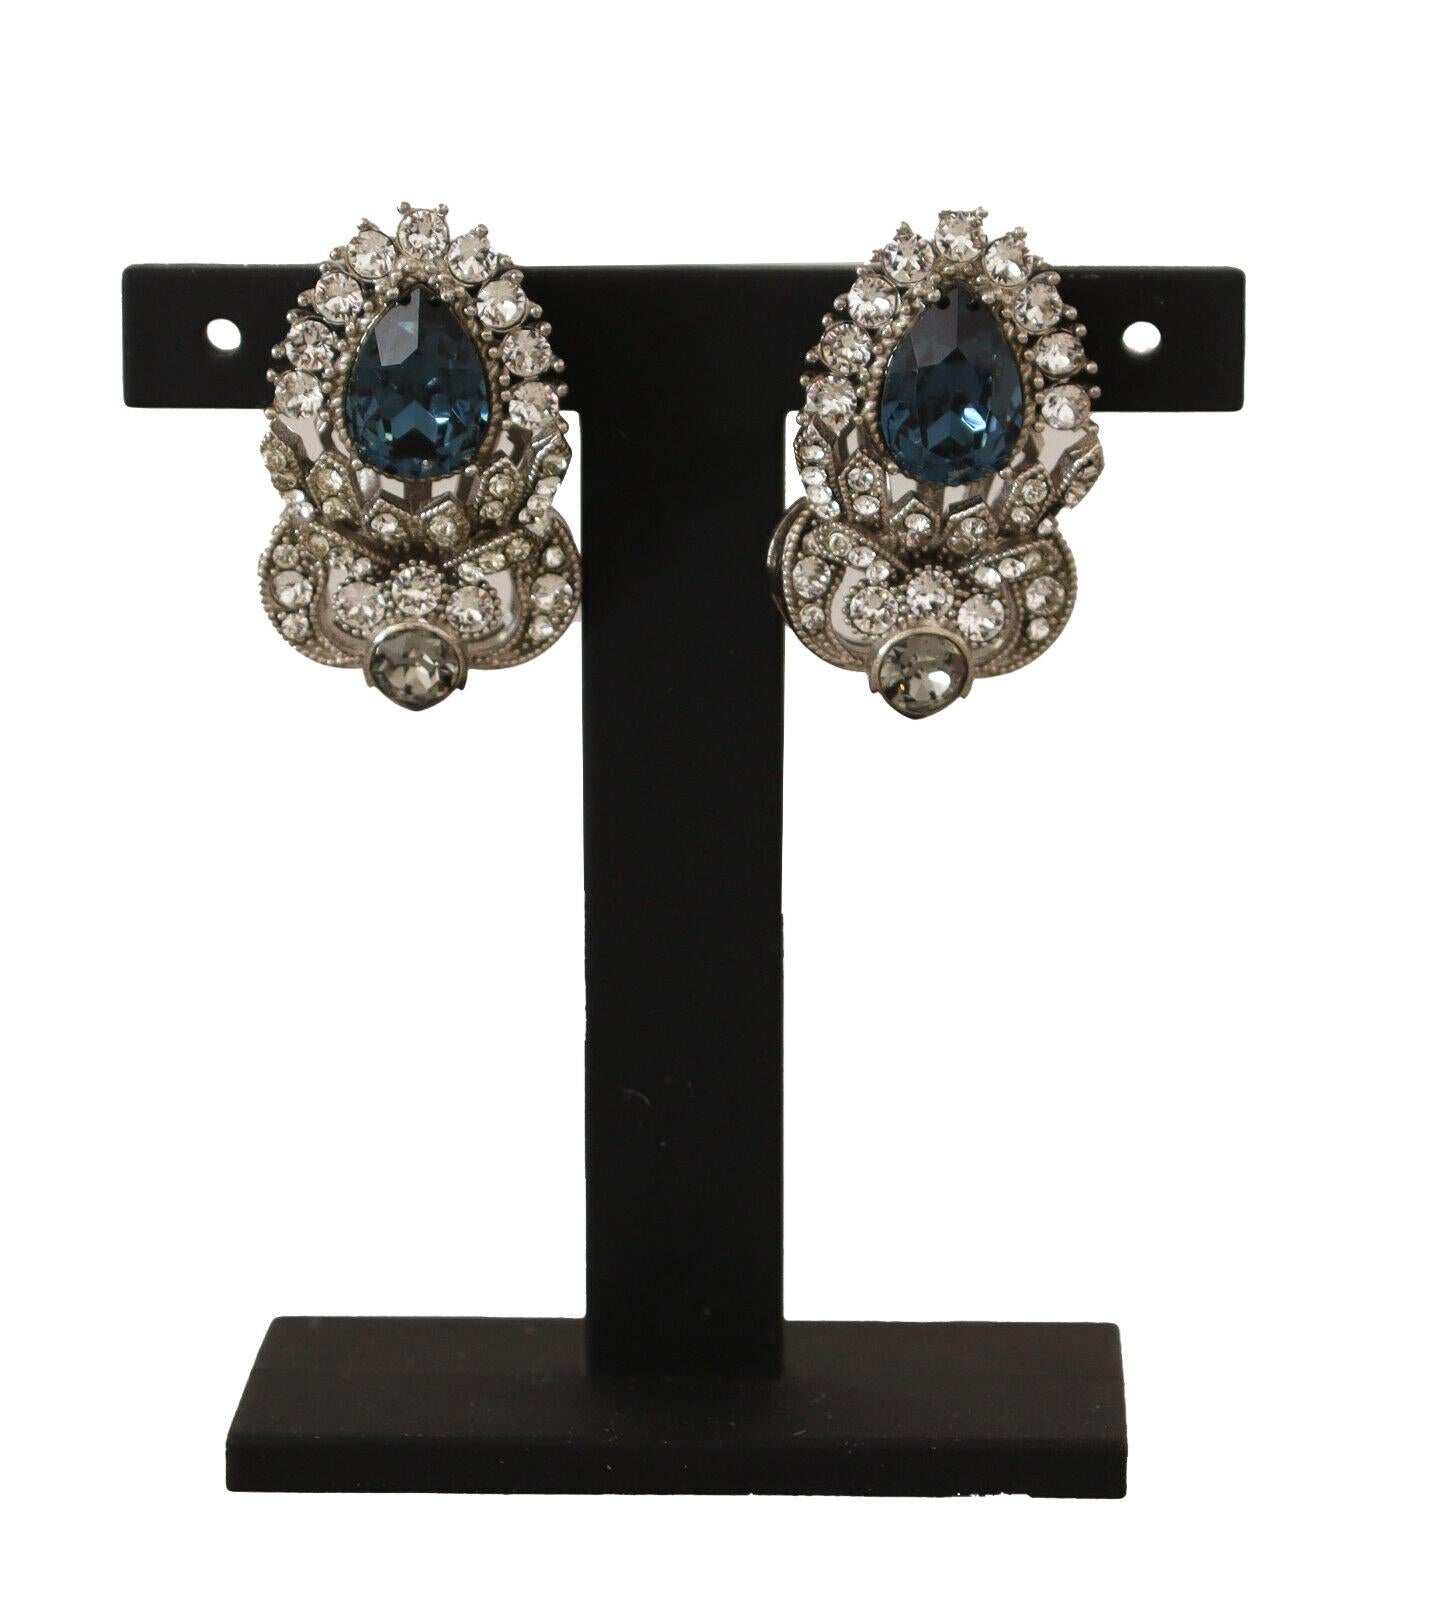 DOLCE & GABBANA

Gorgeous brand new with tags, 100% Authentic Dolce & Gabbana Earrings.



Model: Screw back closure
Motive: Sicily
Material: 70% Sterling 925 Silver, 30% Glass

Color: Silver
Crystals: Clear and blue

Logo details
Made in